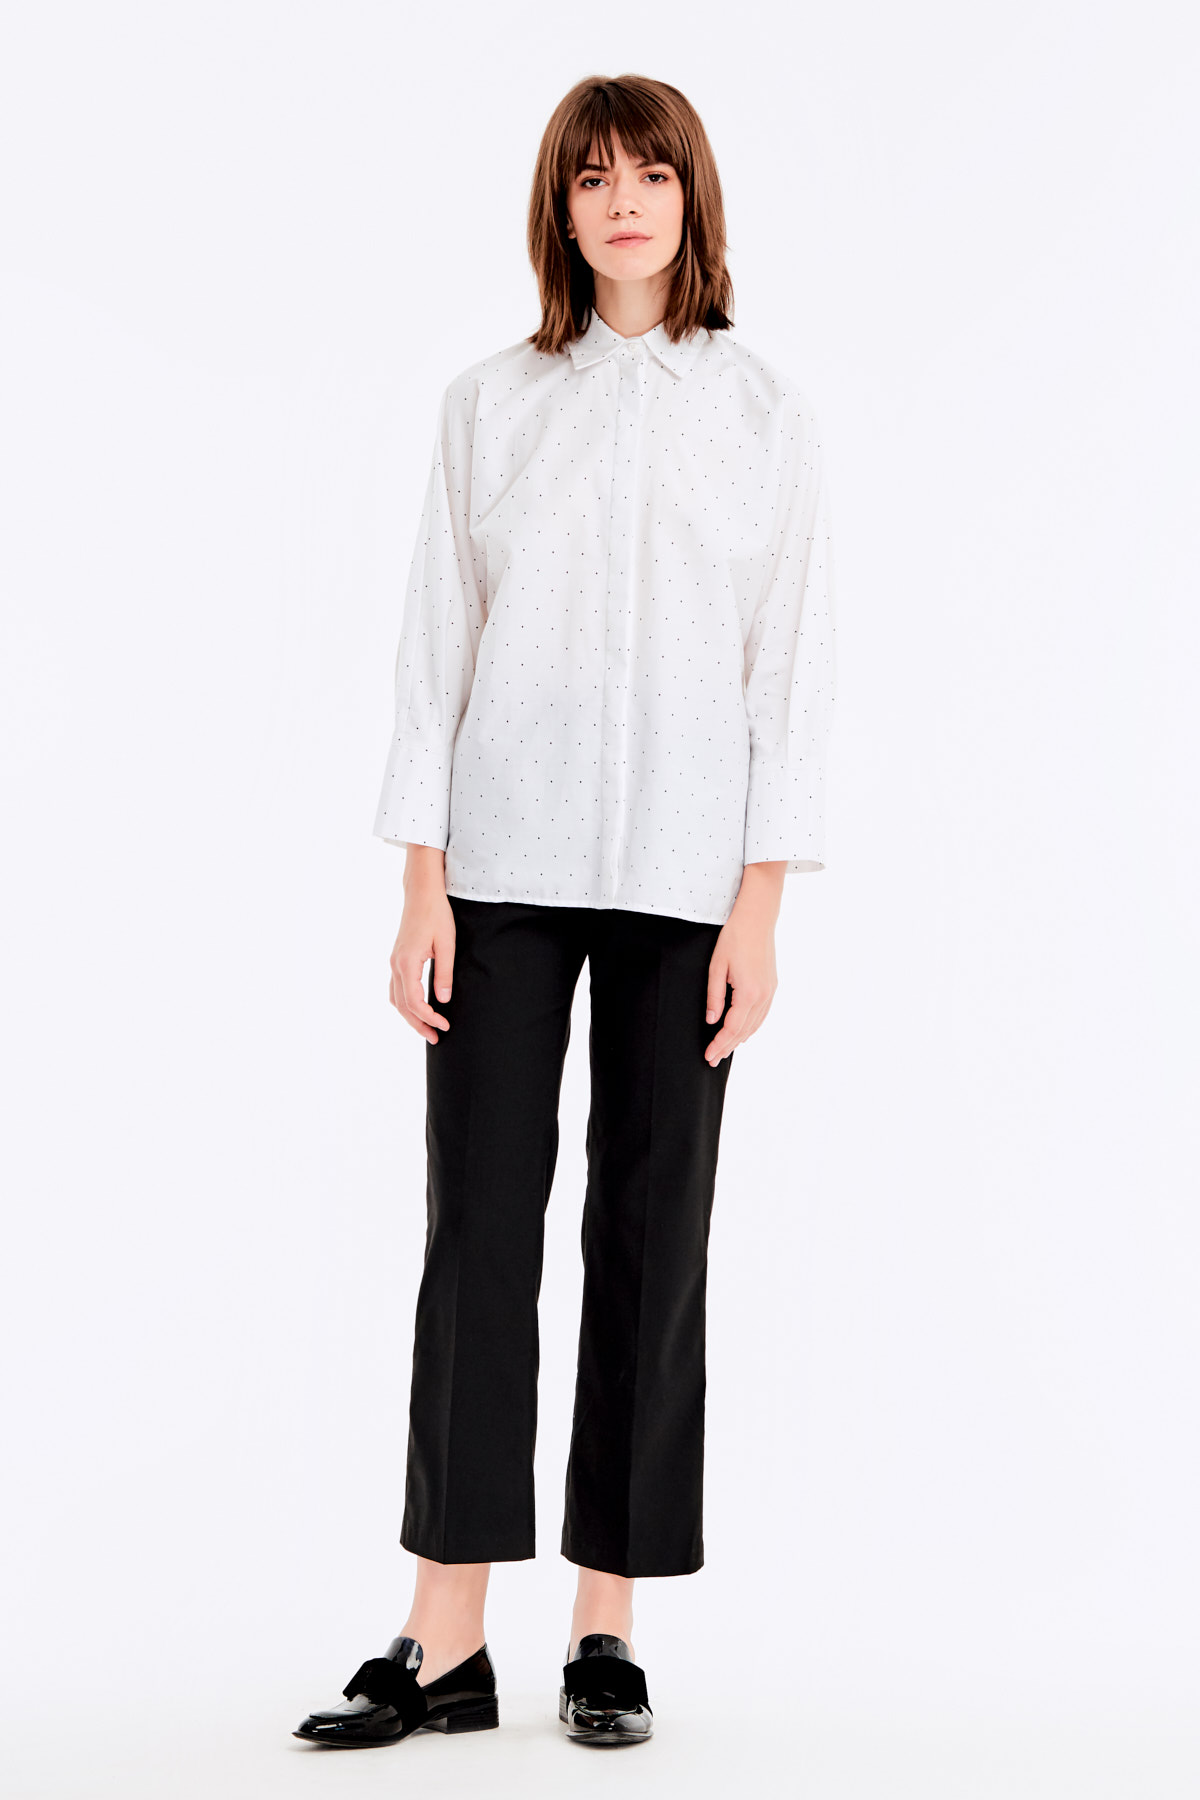 Loose-fitting white shirt with a black polka dot print and a concealed placket, photo 4